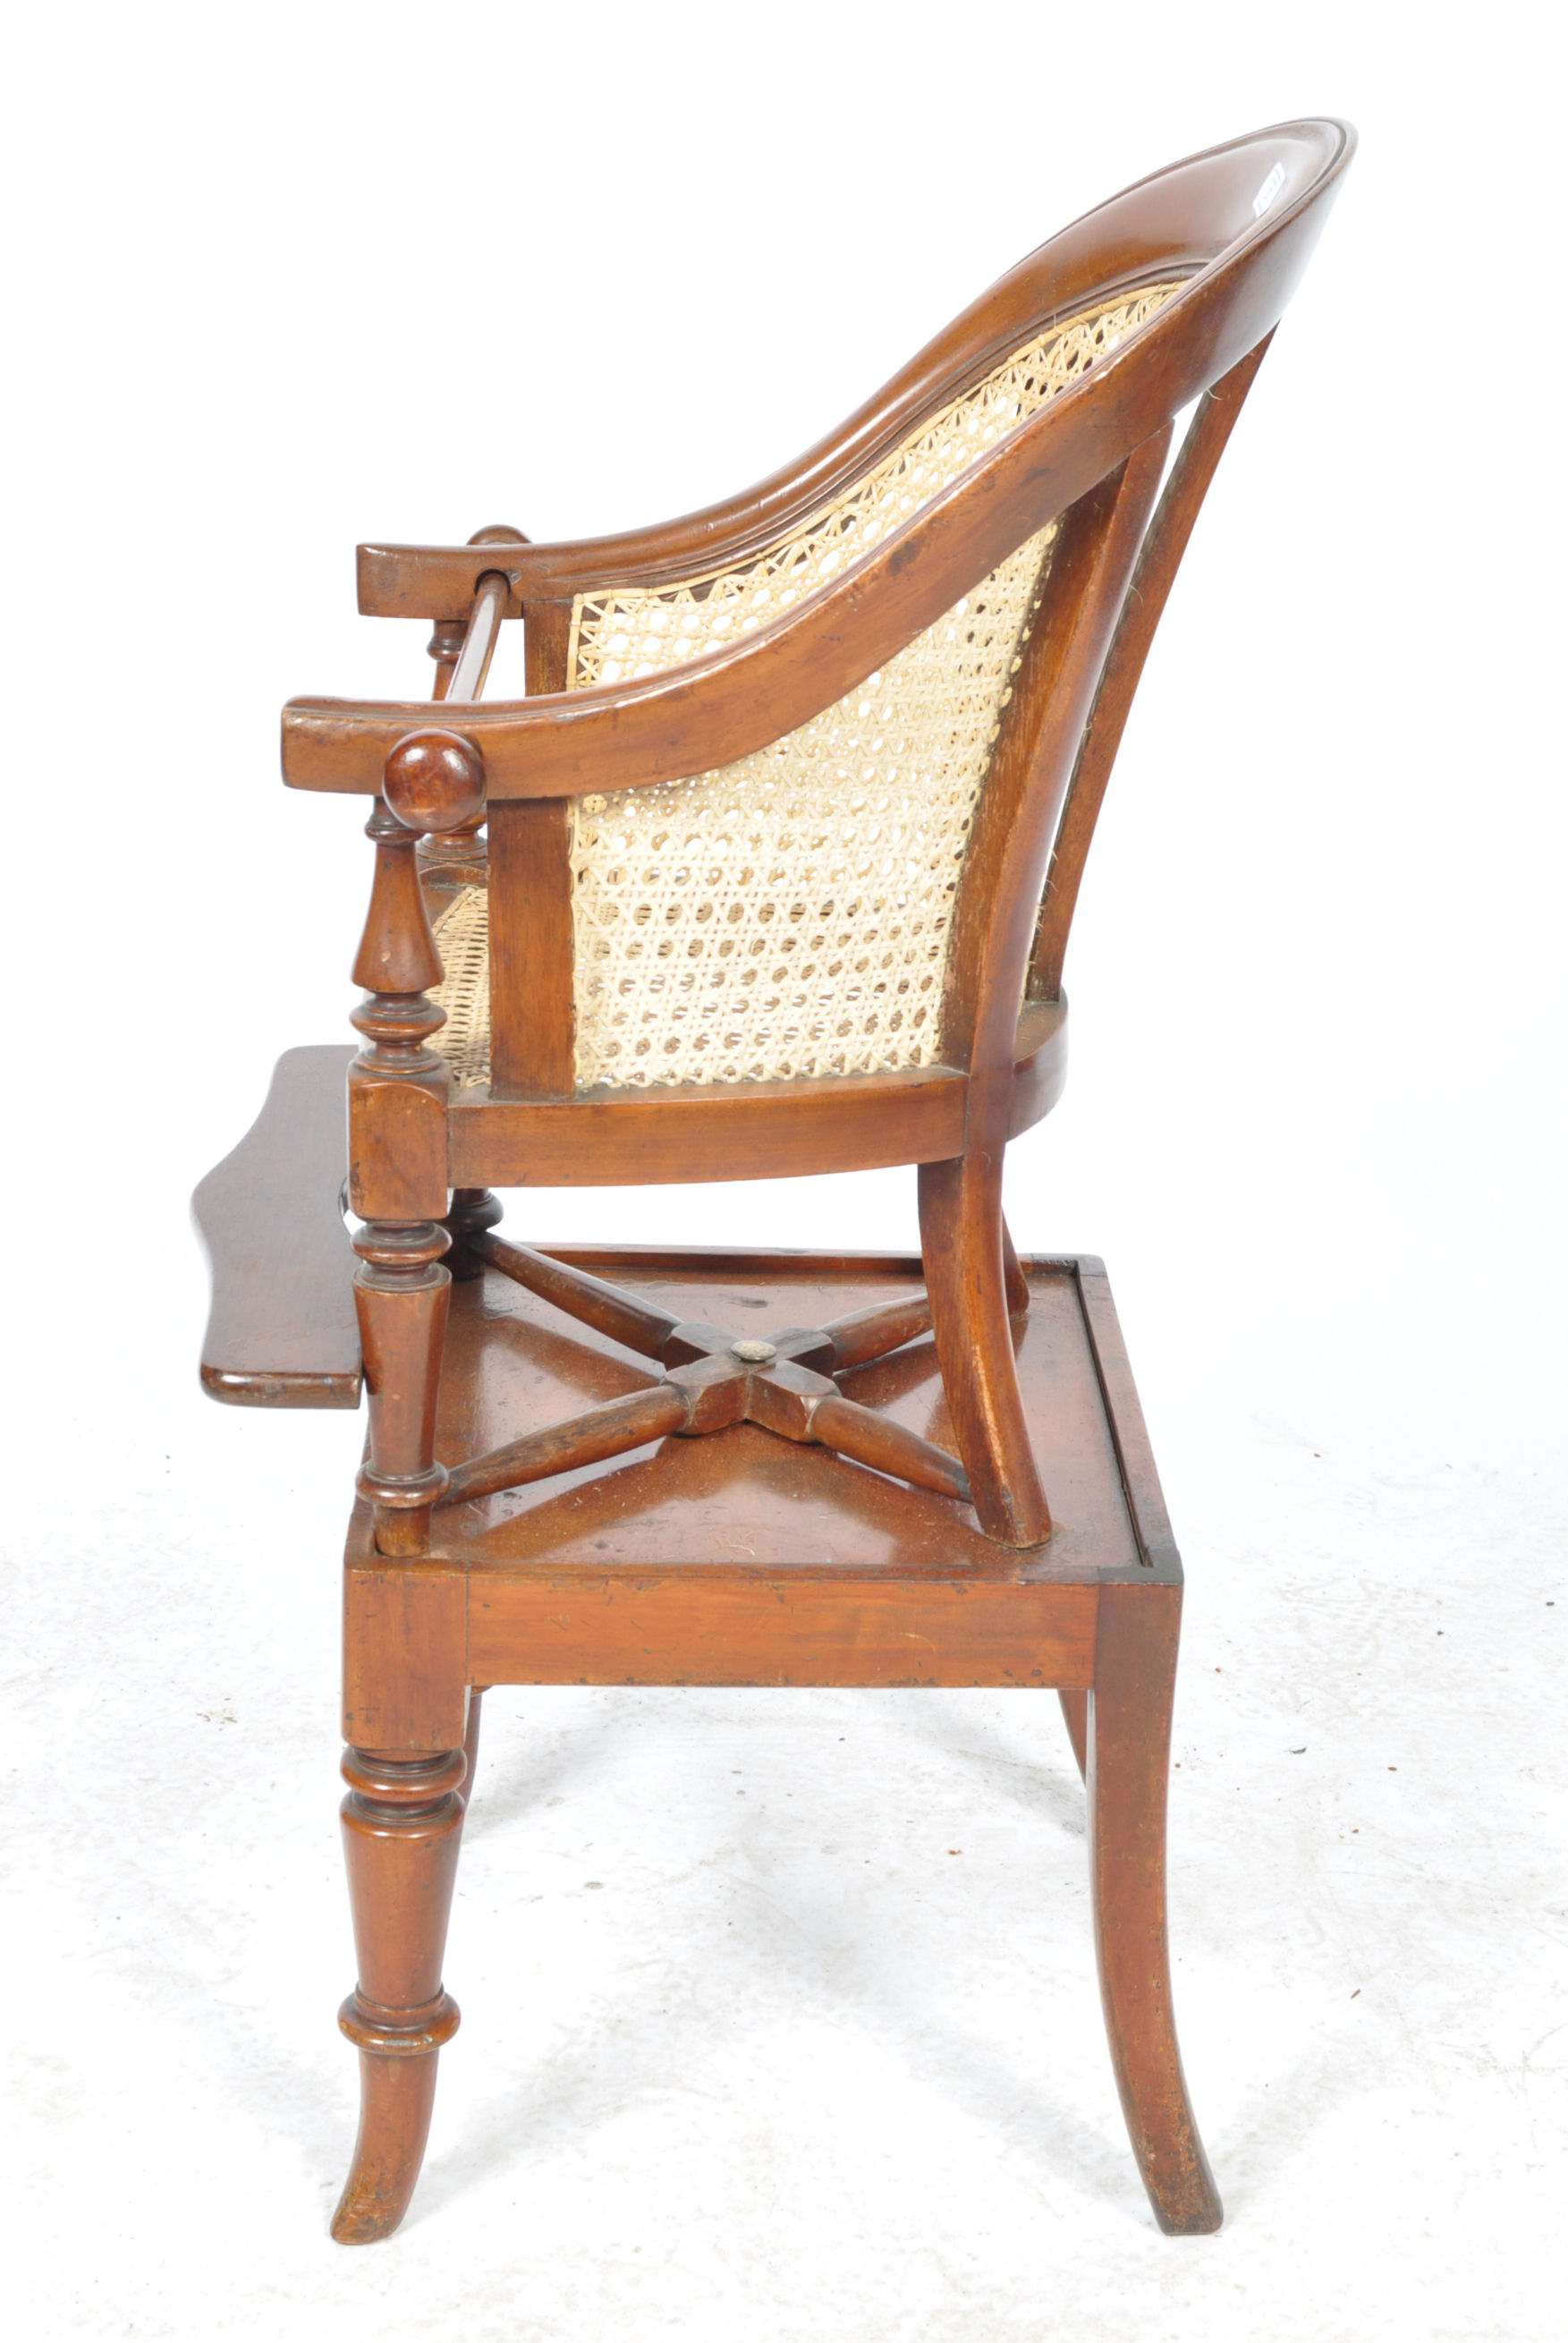 19TH CENTURY VICTORIAN ENGLISH ANTIQUE HIGH CHAIR - Image 11 of 16